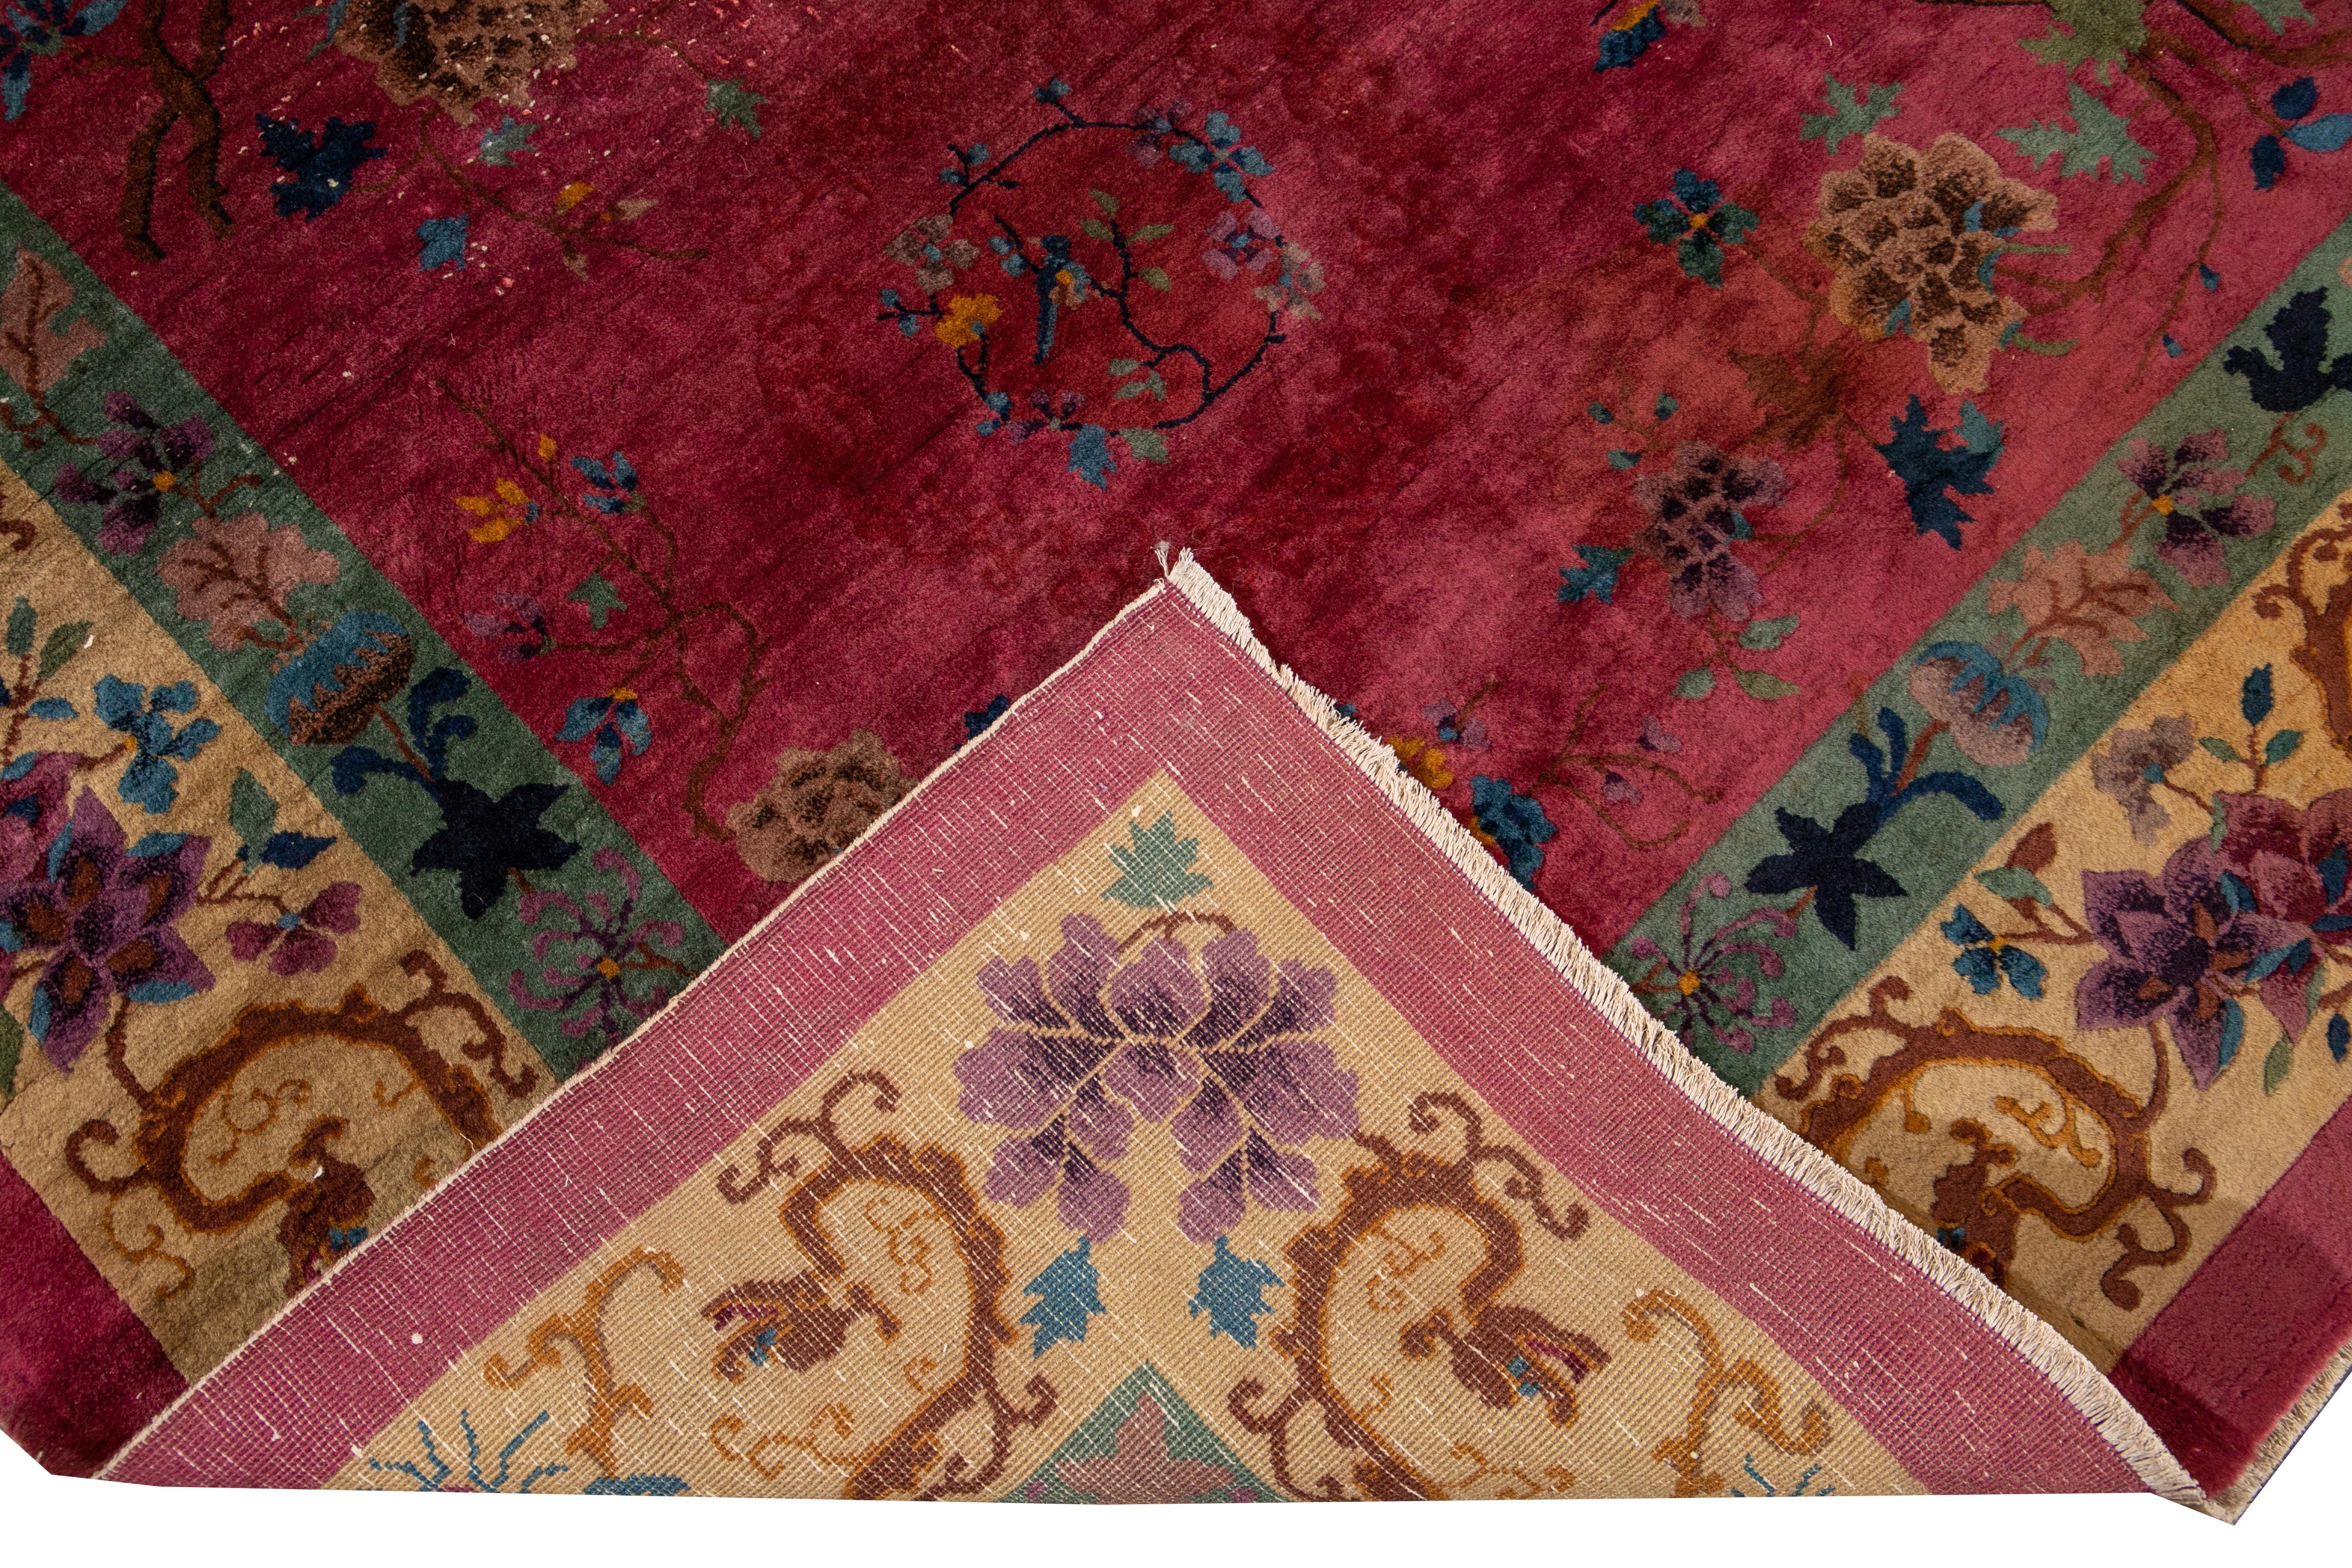 Beautiful vintage Art Deco Chinese hand knotted wool rug with a red field. This Art Deco rug has multi-color accents in a gorgeous all-over floral Chinese design.

This rug measures: 8'11